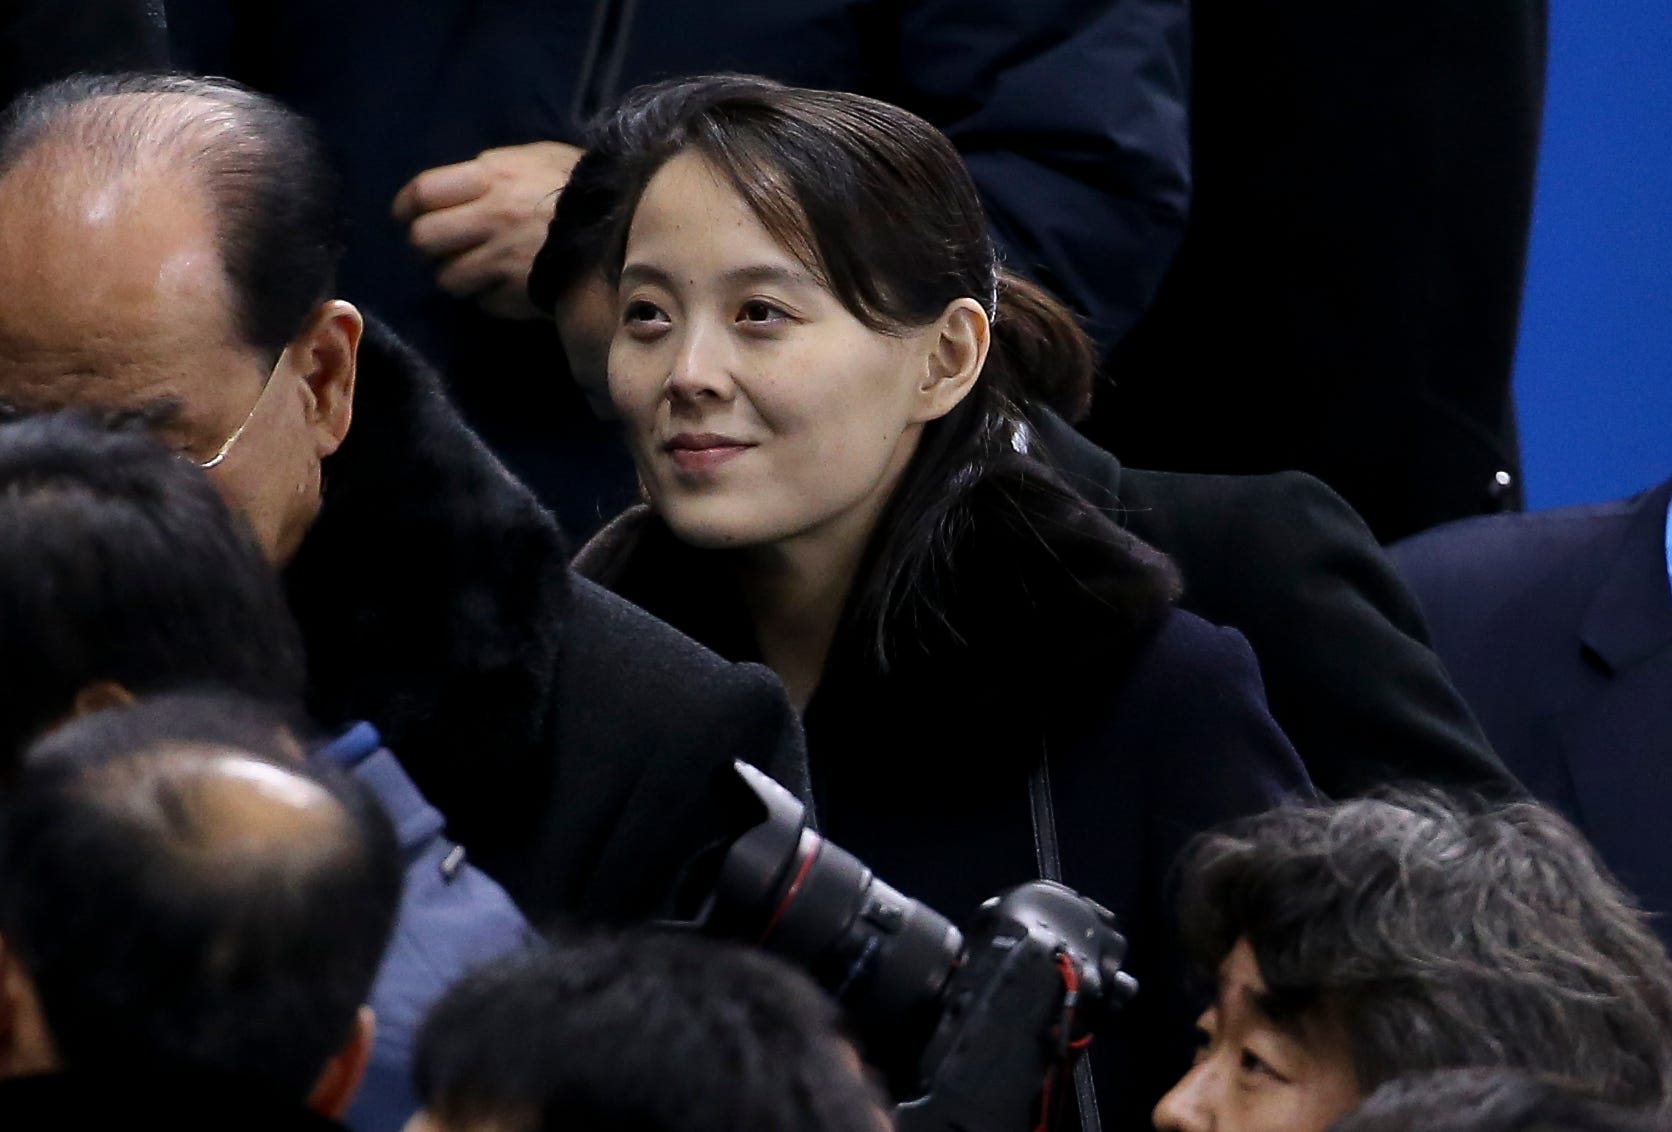 Kim Yo-jong, sister of Kim Jong-un attends the women's ice hockey preliminary match between Korea and Switzerland during the 2018 Winter Olympic Games at Kwandong Hockey Centre on February 10, 2018 in Gangneung, Pyeongchang, South Korea.